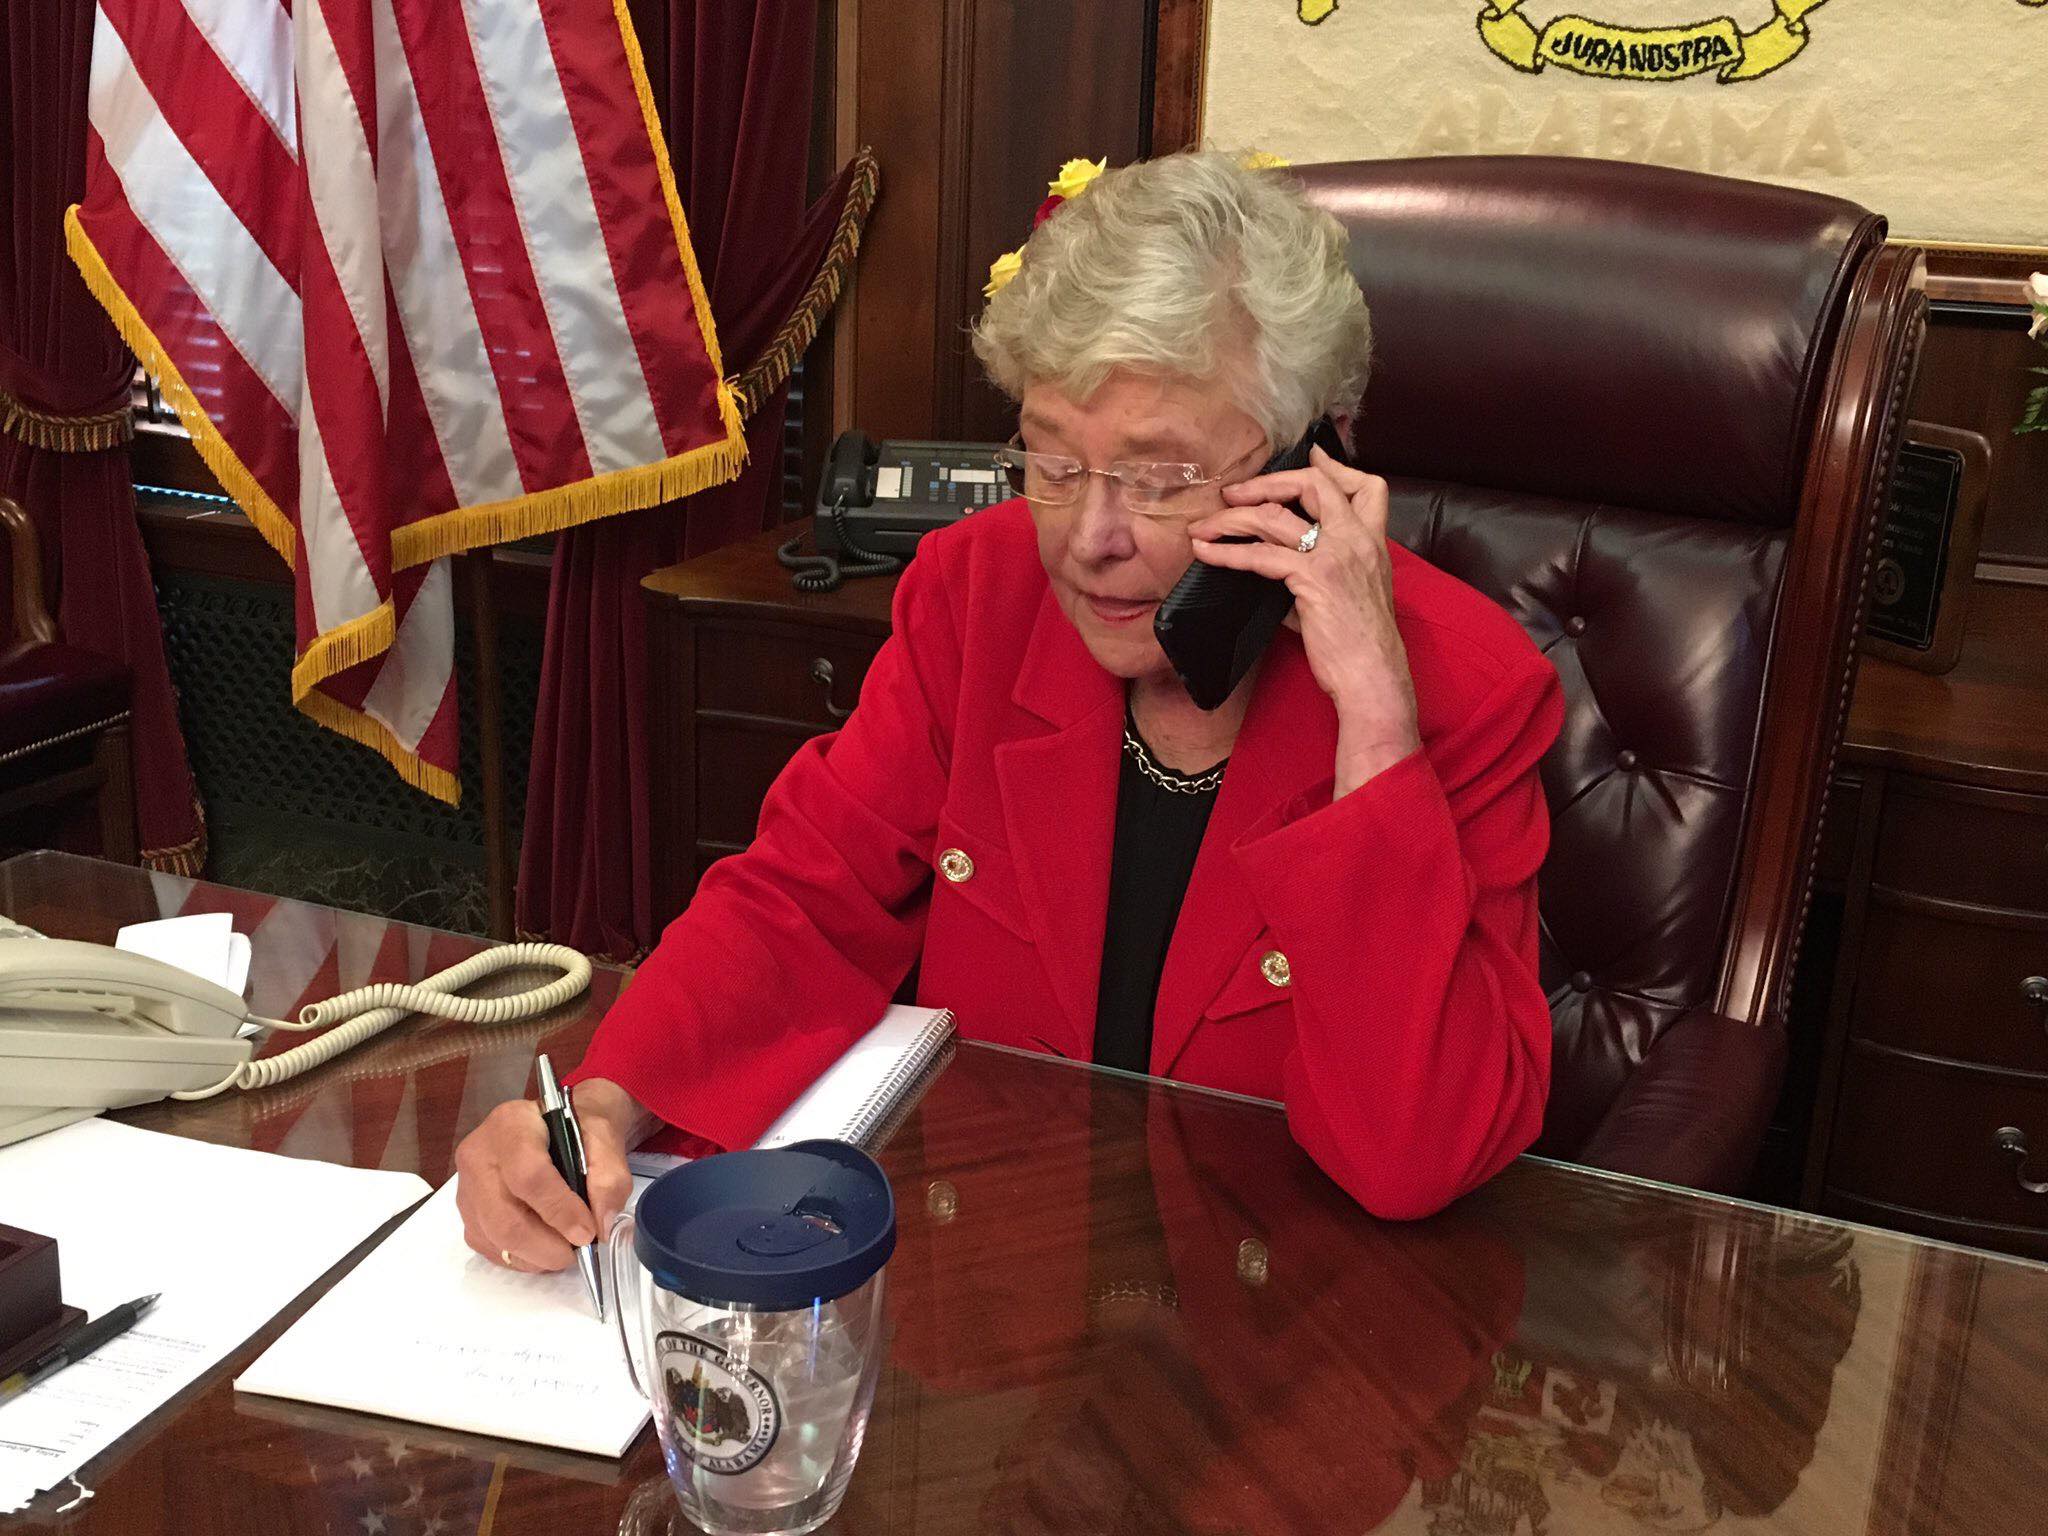 Alabama governor signs law to allow discrimination against LGBT parents